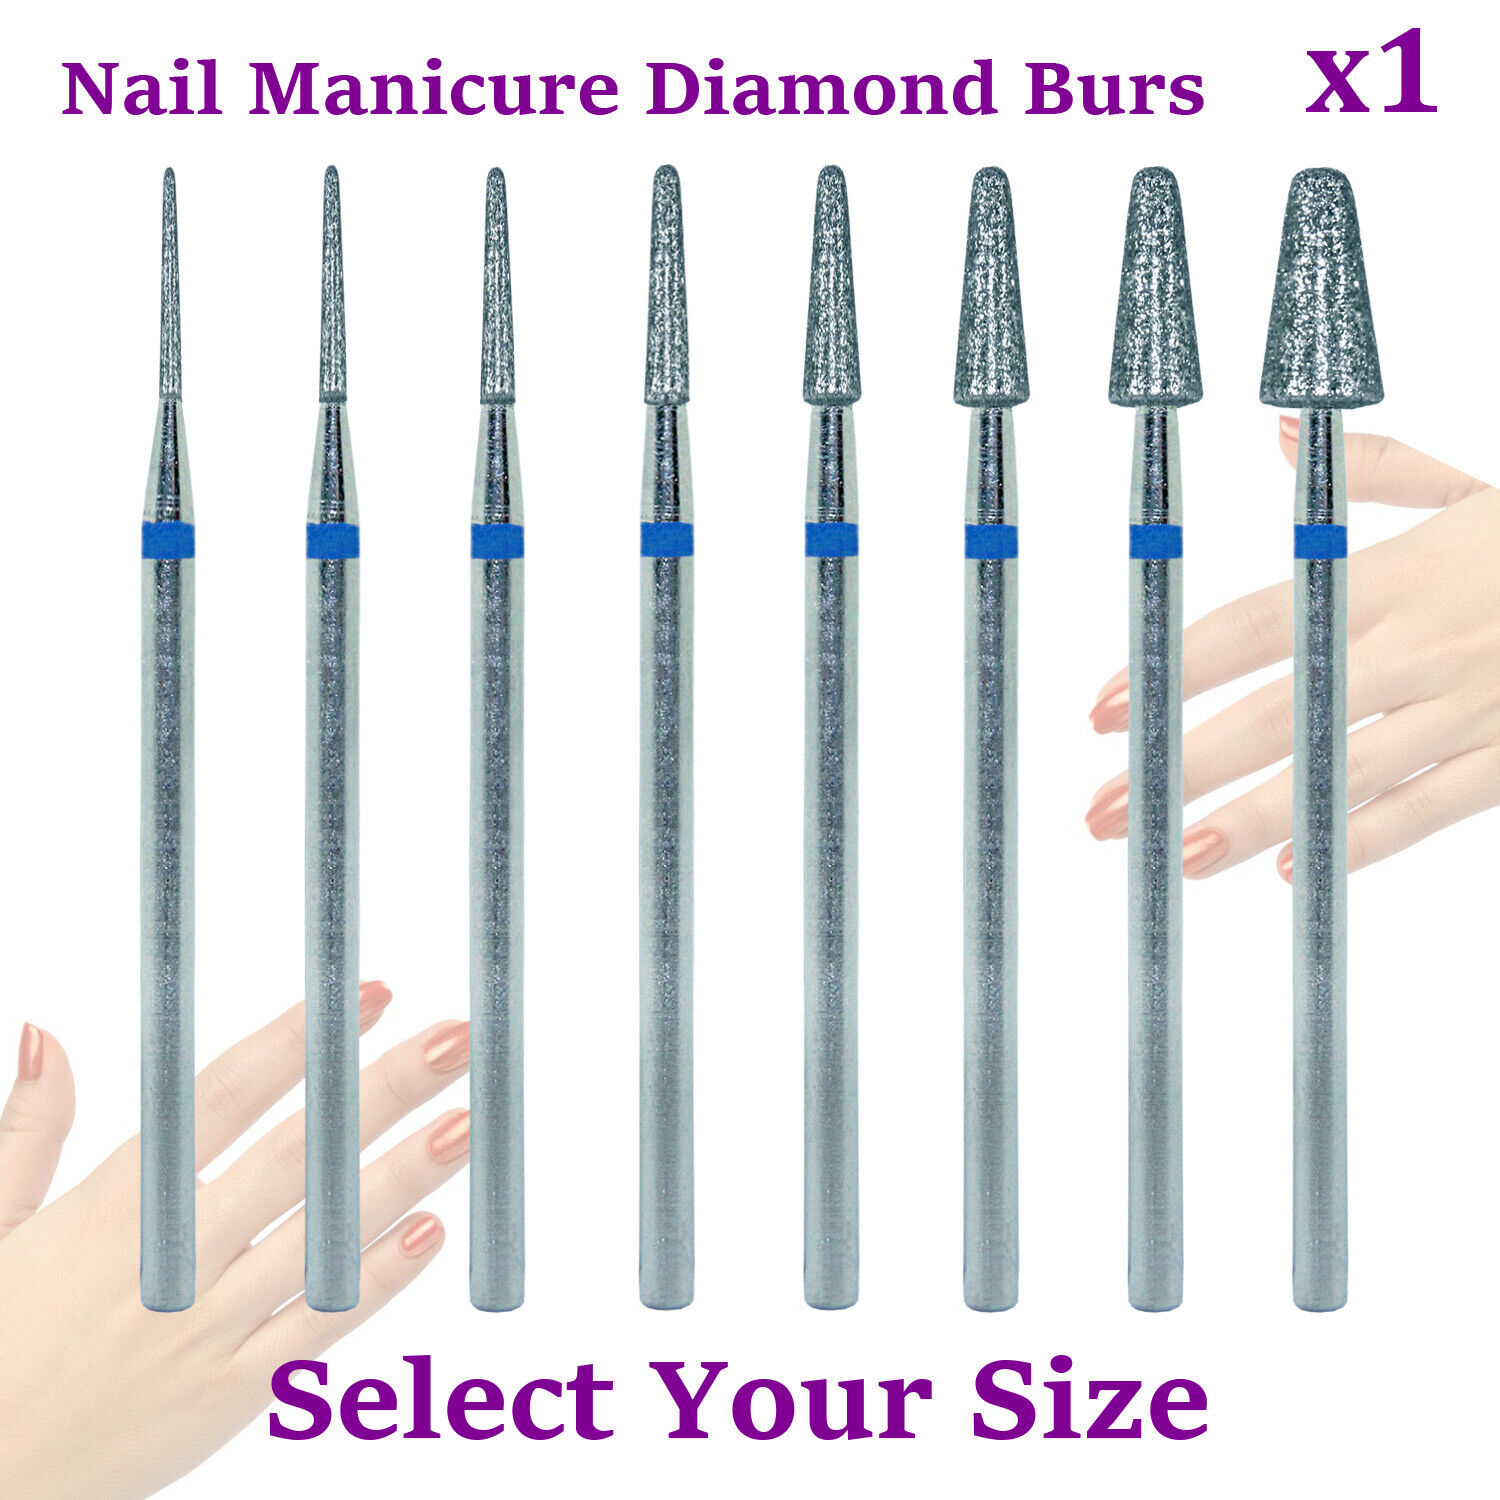 1x Free shipping on posting reviews A surprise price is realized Diamond Nail Manicure Pedicure Rounded Taper Cuticle B Remove